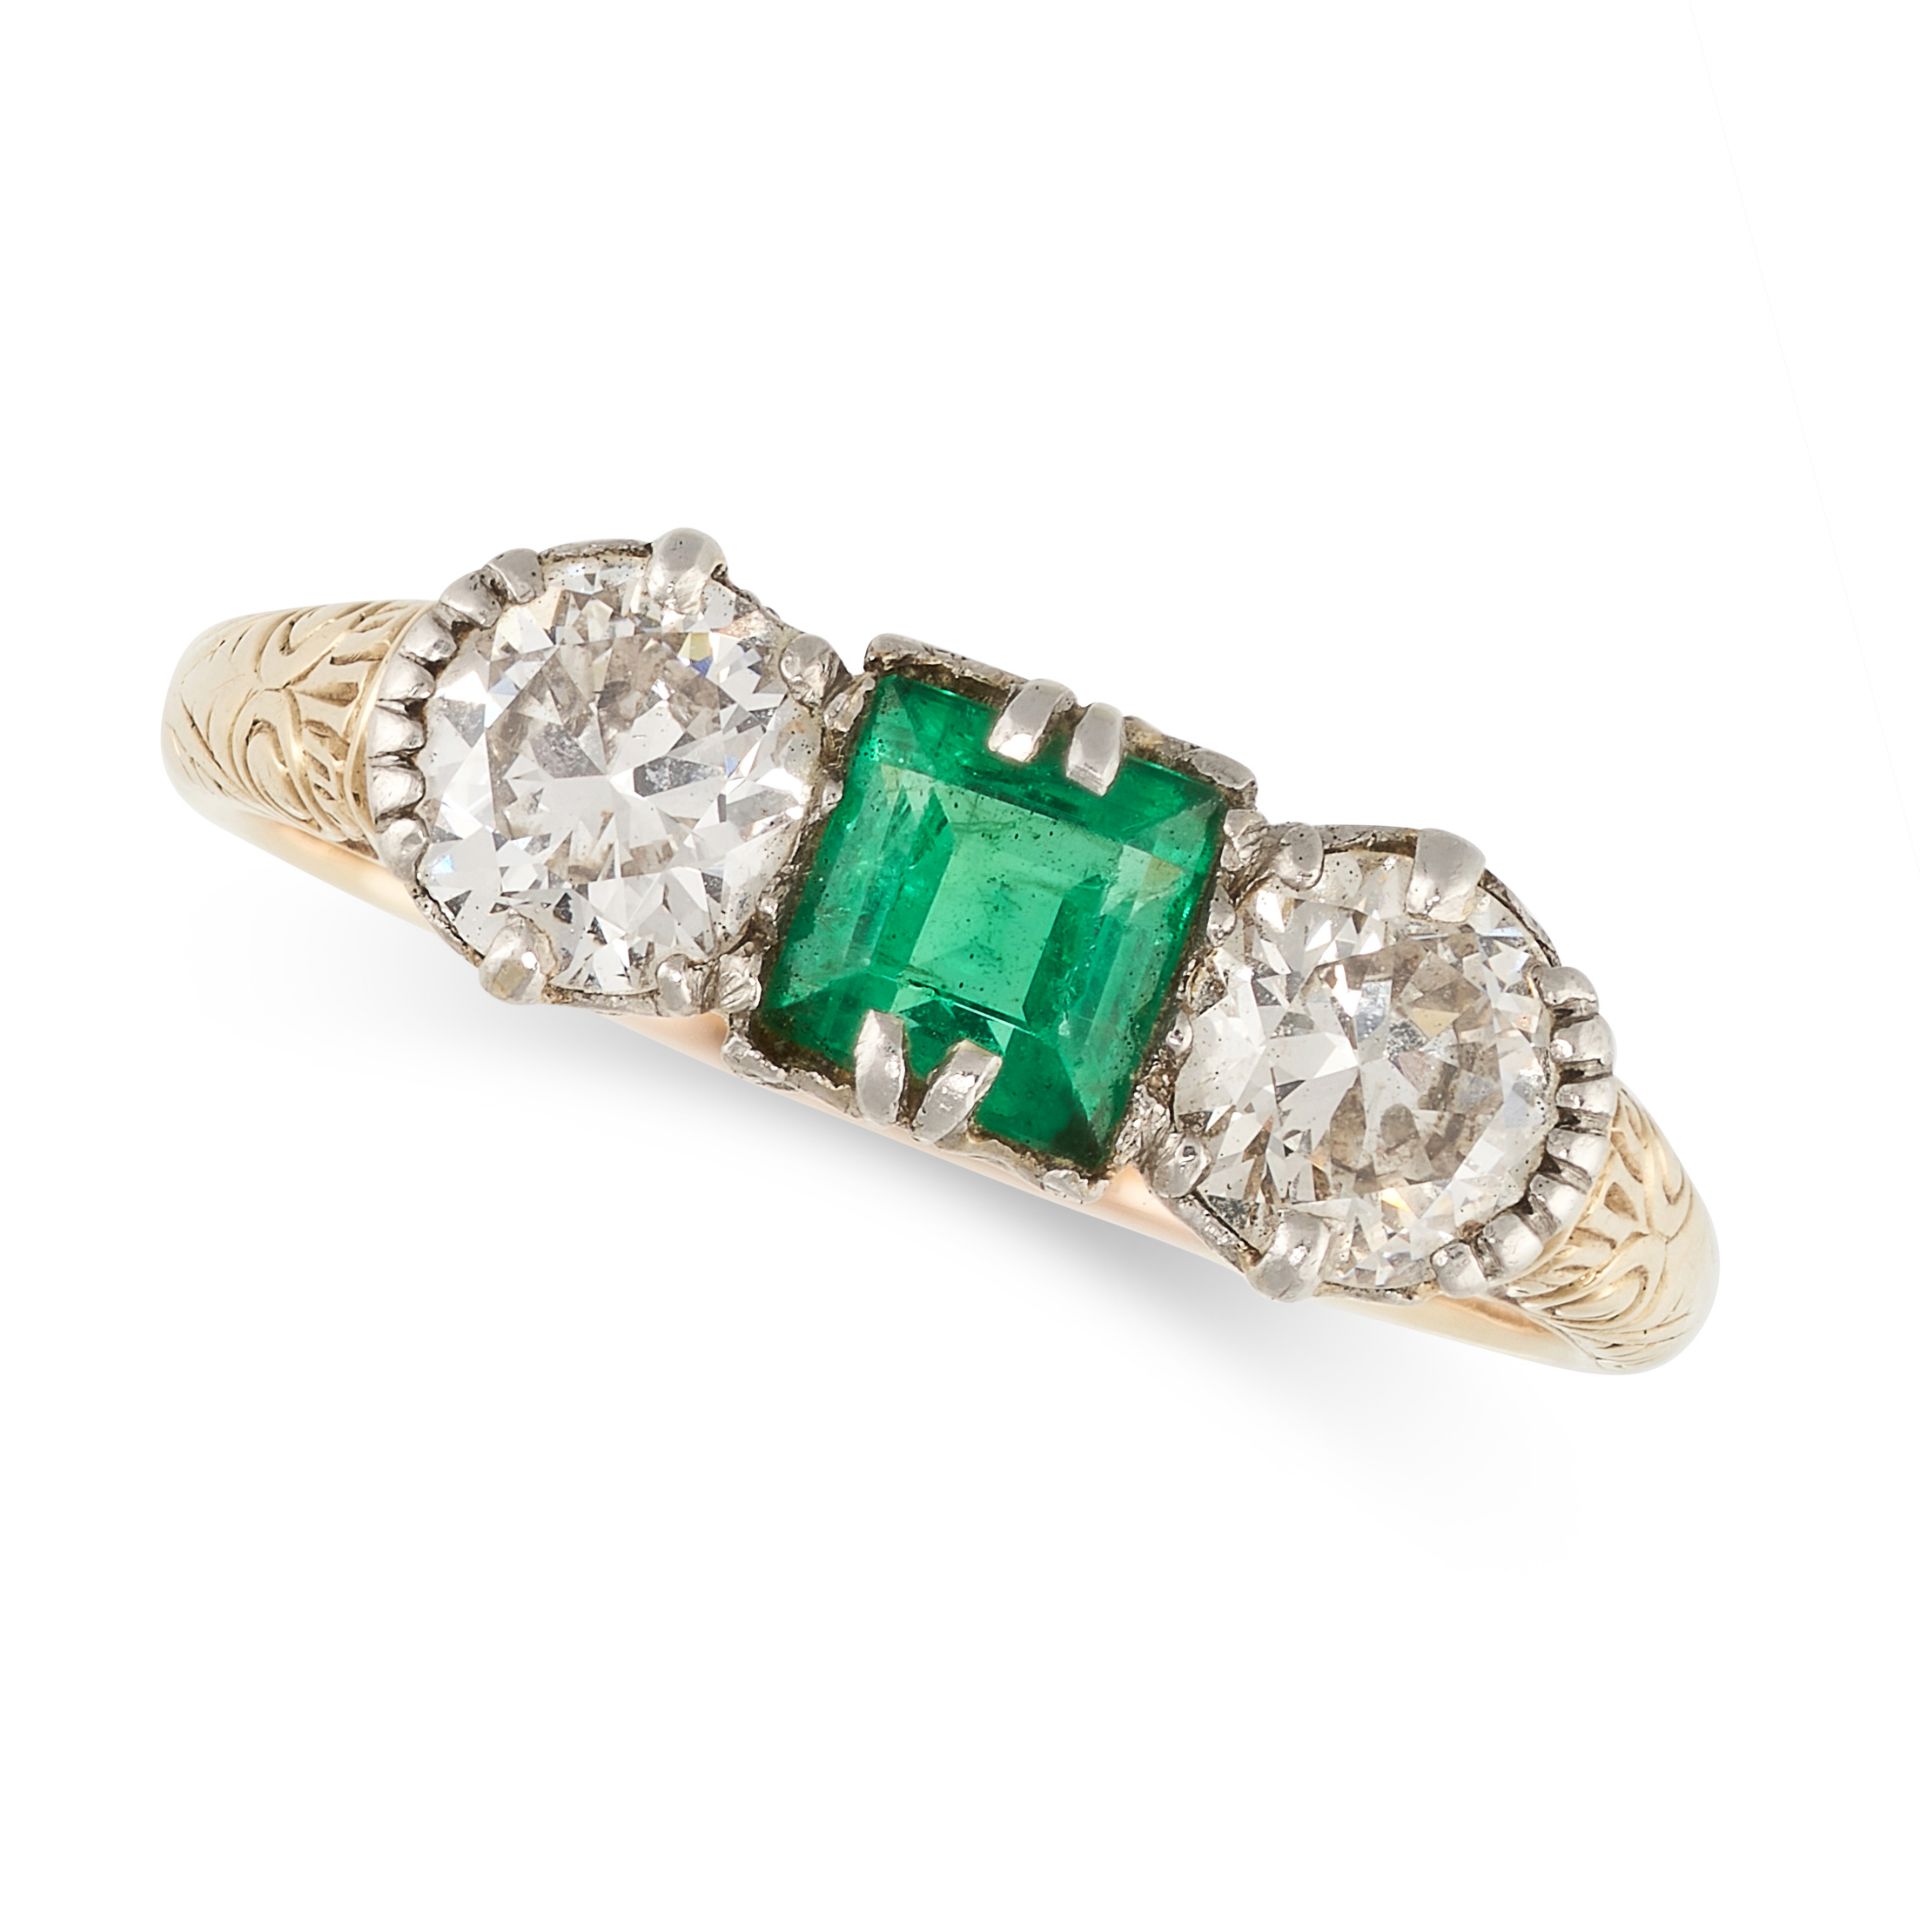 NO RESERVE - A VINTAGE EMERALD AND DIAMOND RING, CIRCA 1950 in 14ct yellow gold, set with a square